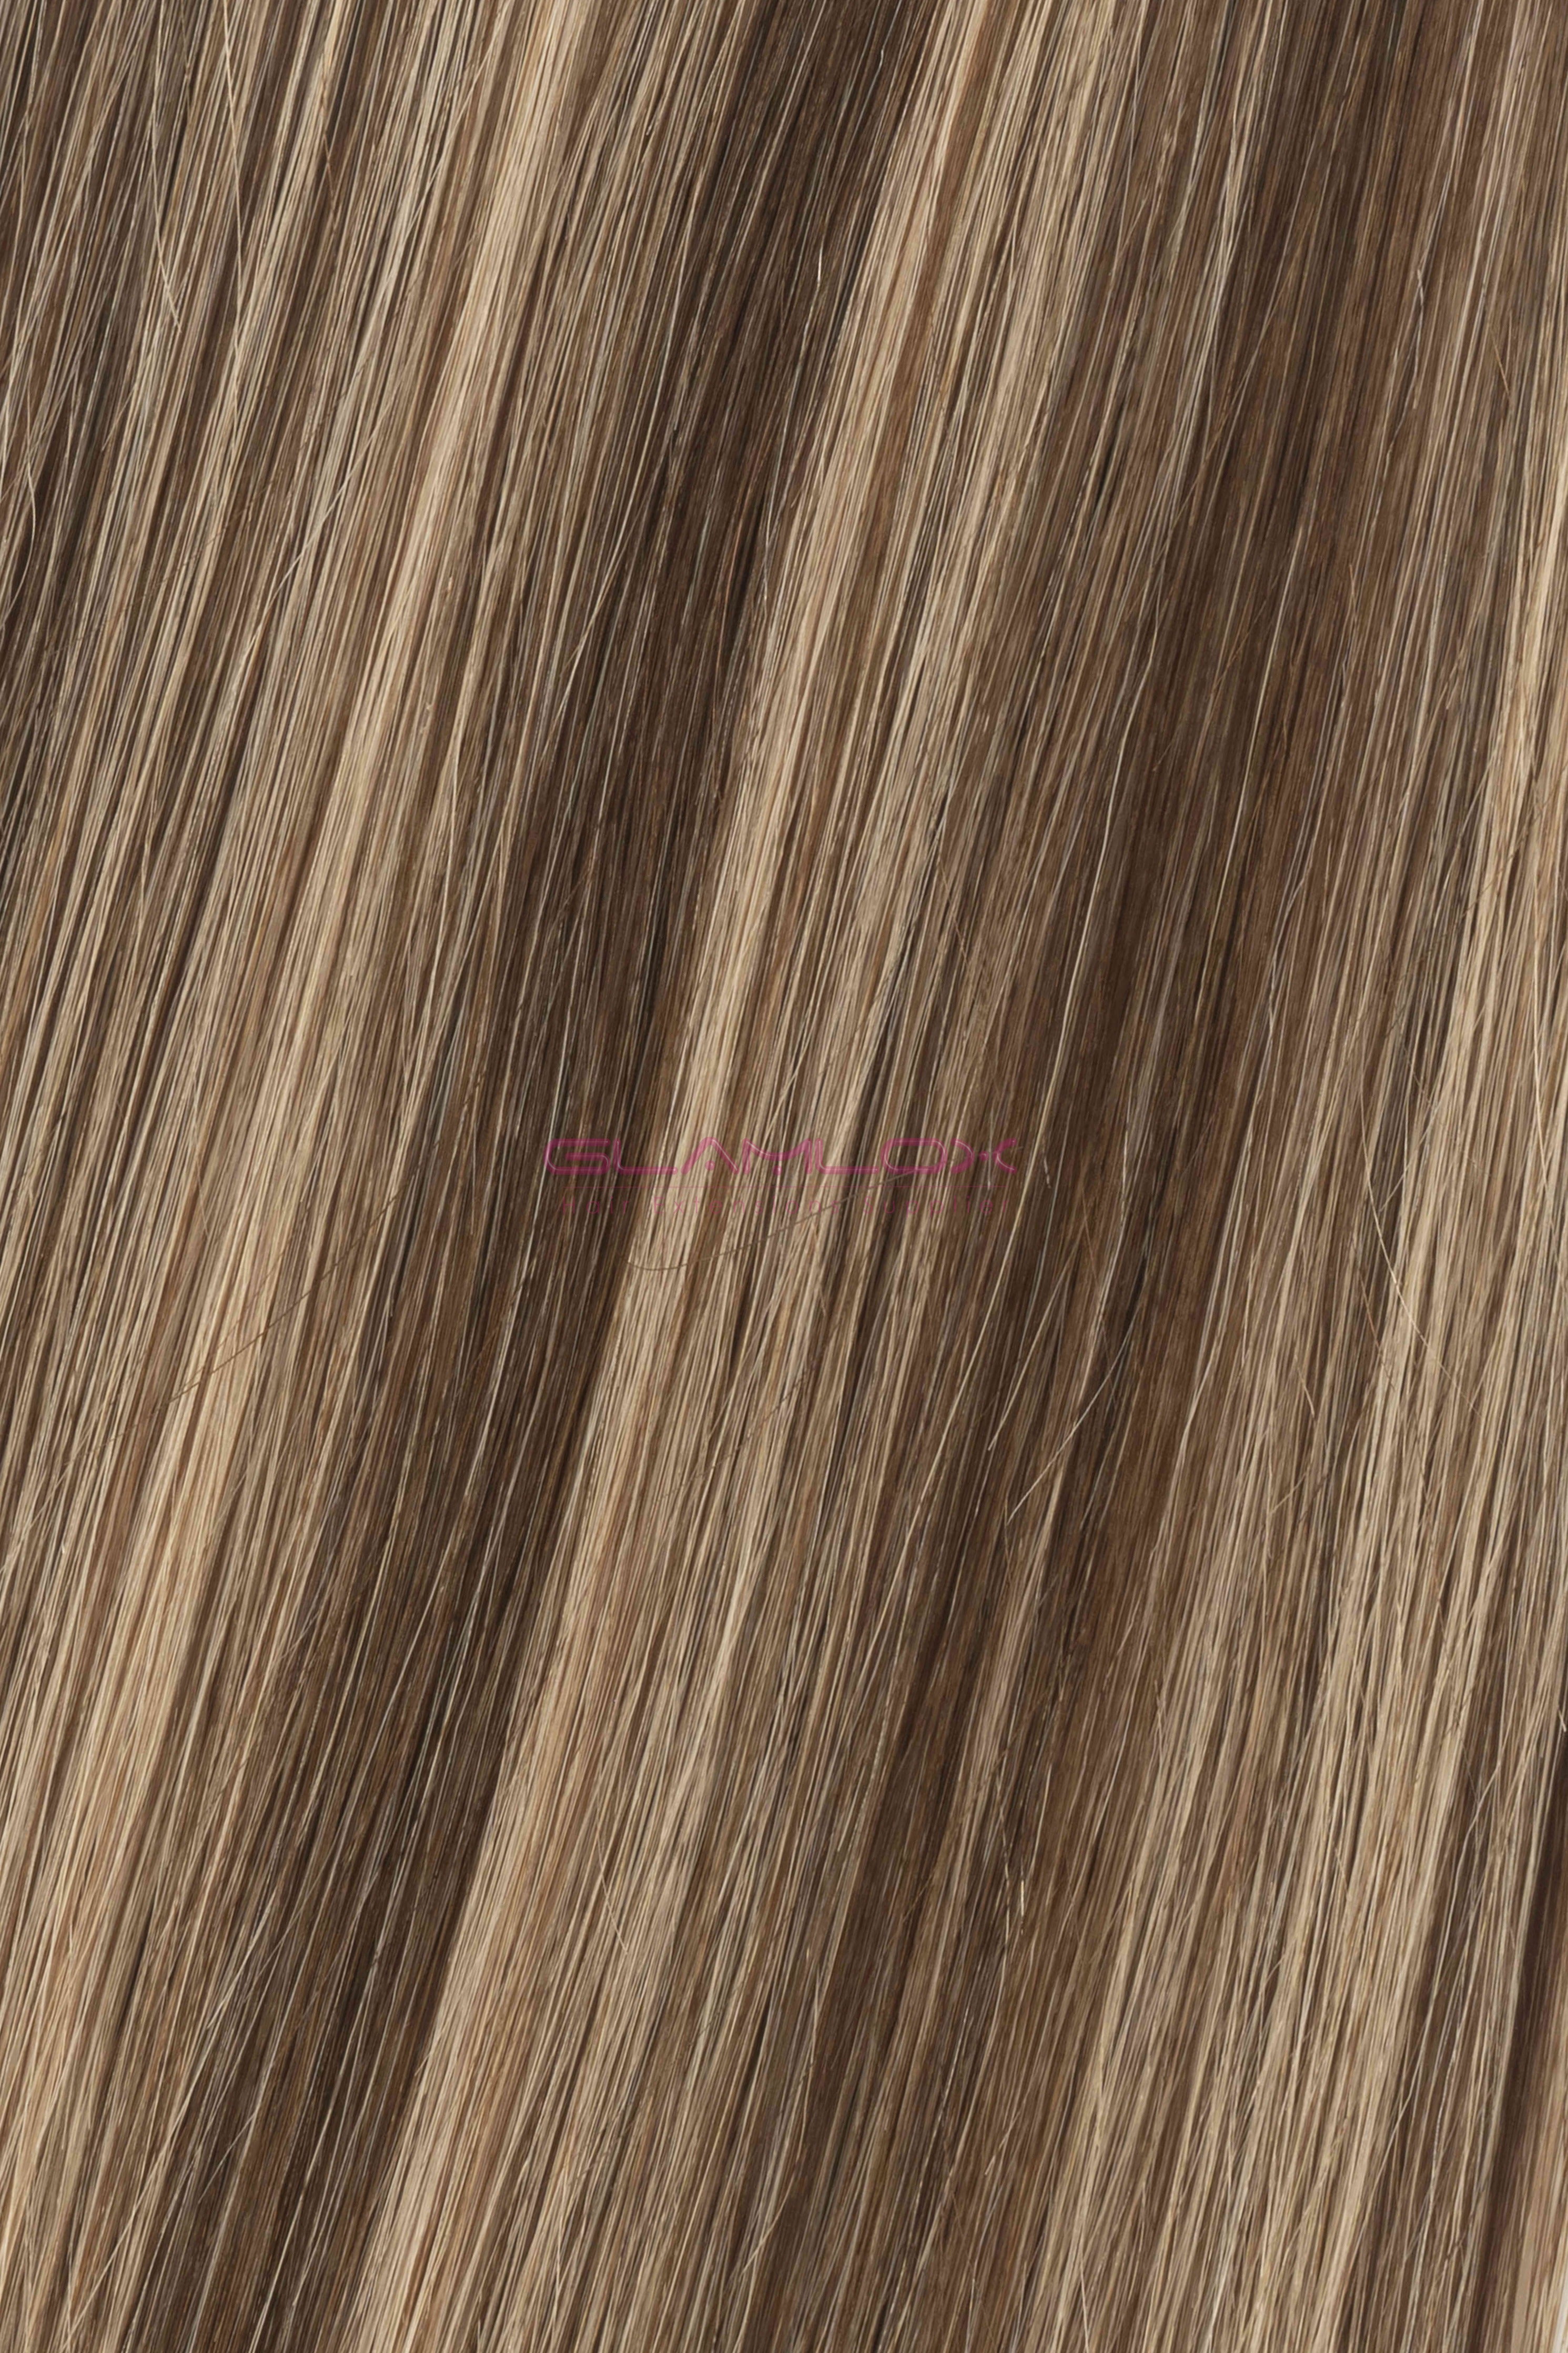 18" - 20" Ultra Weft Hair Extensions - Russian Mongolian Double Drawn Remy Human Hair